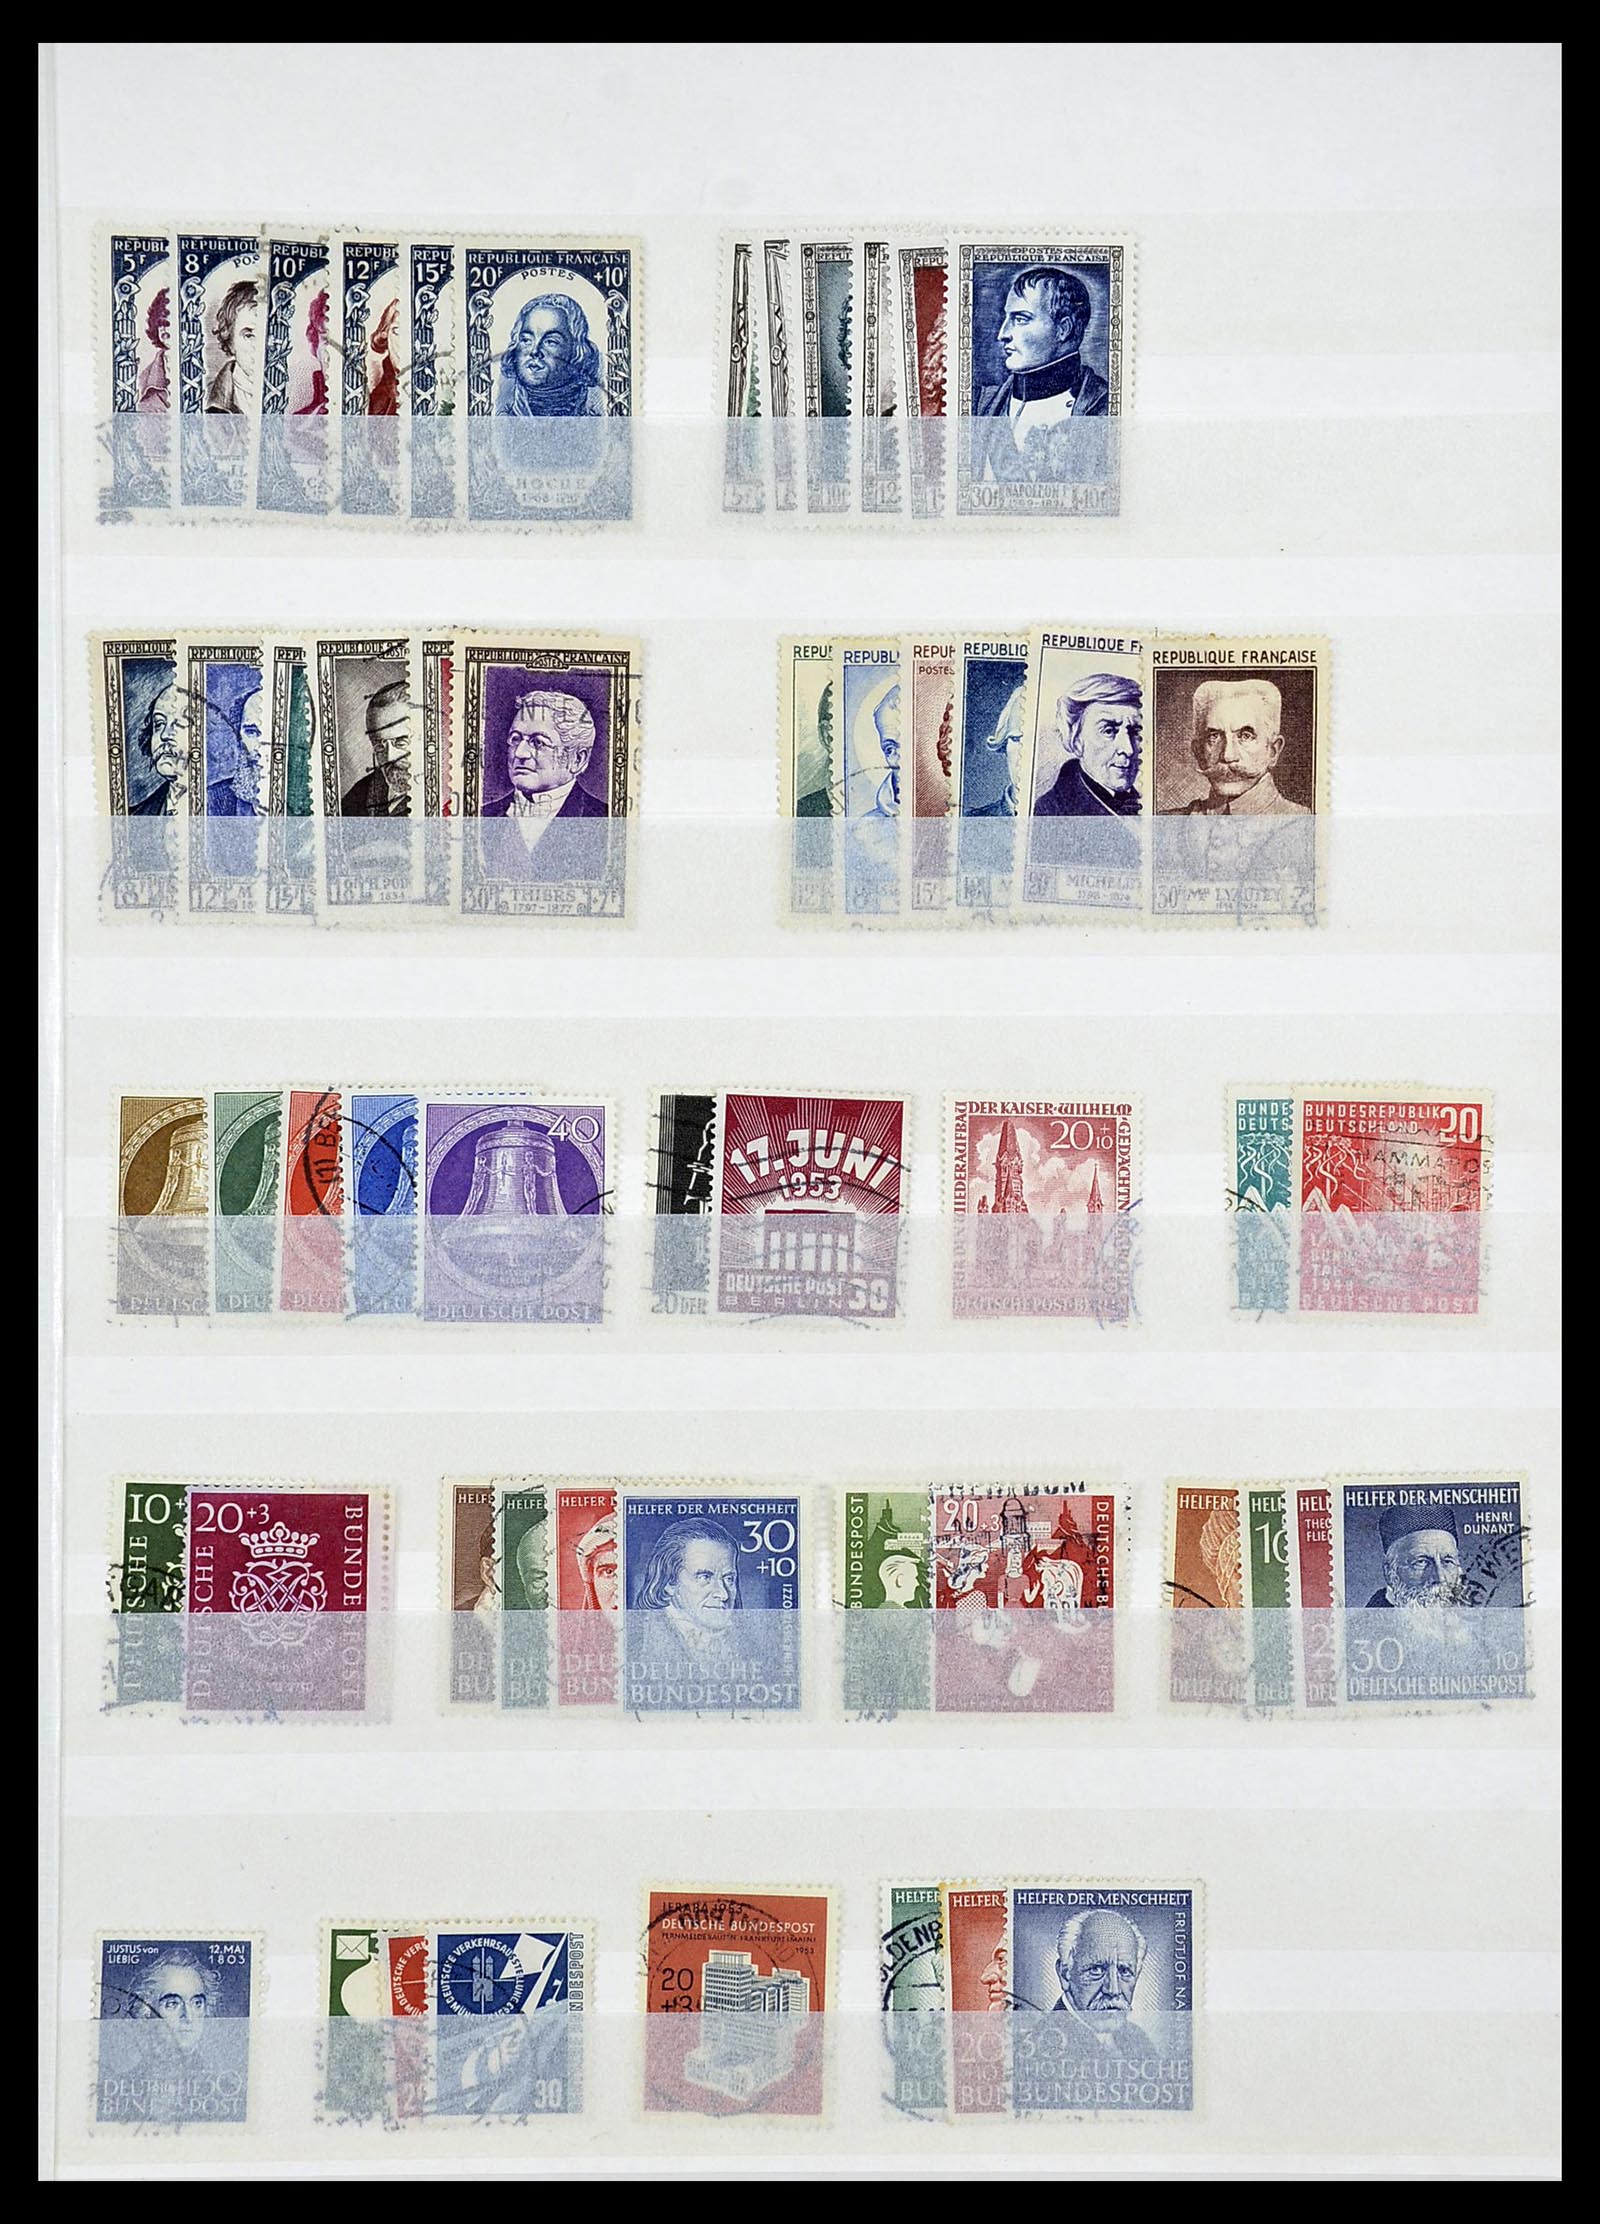 34263 025 - Stamp collection 34263 European countries key stamps 1840-1950.